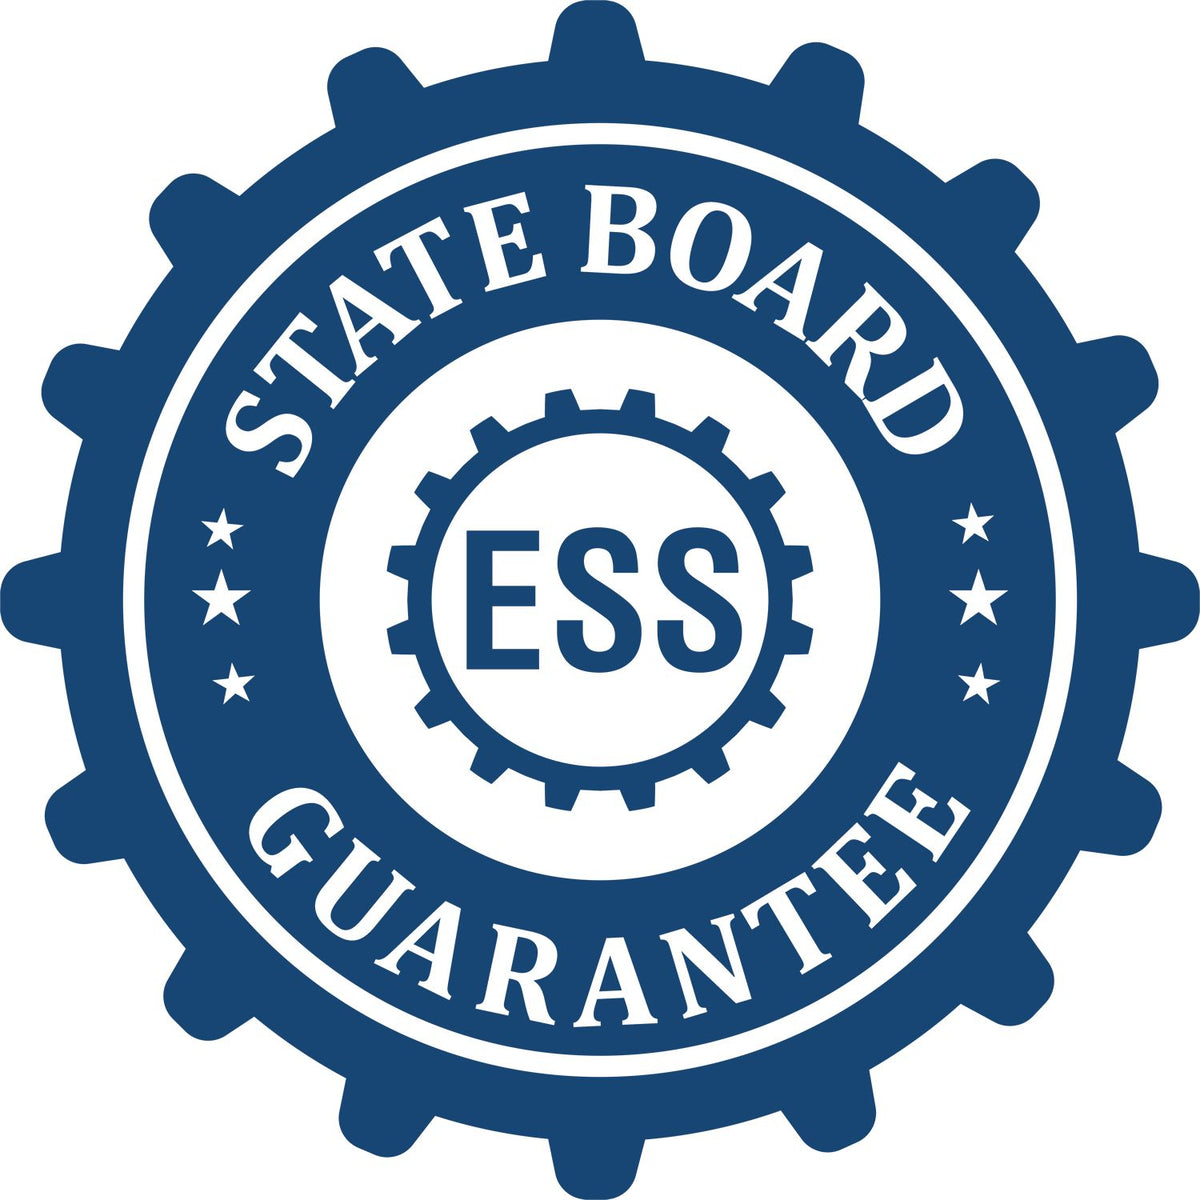 An emblem in a gear shape illustrating a state board guarantee for the California Professional Engineer Seal Stamp product.